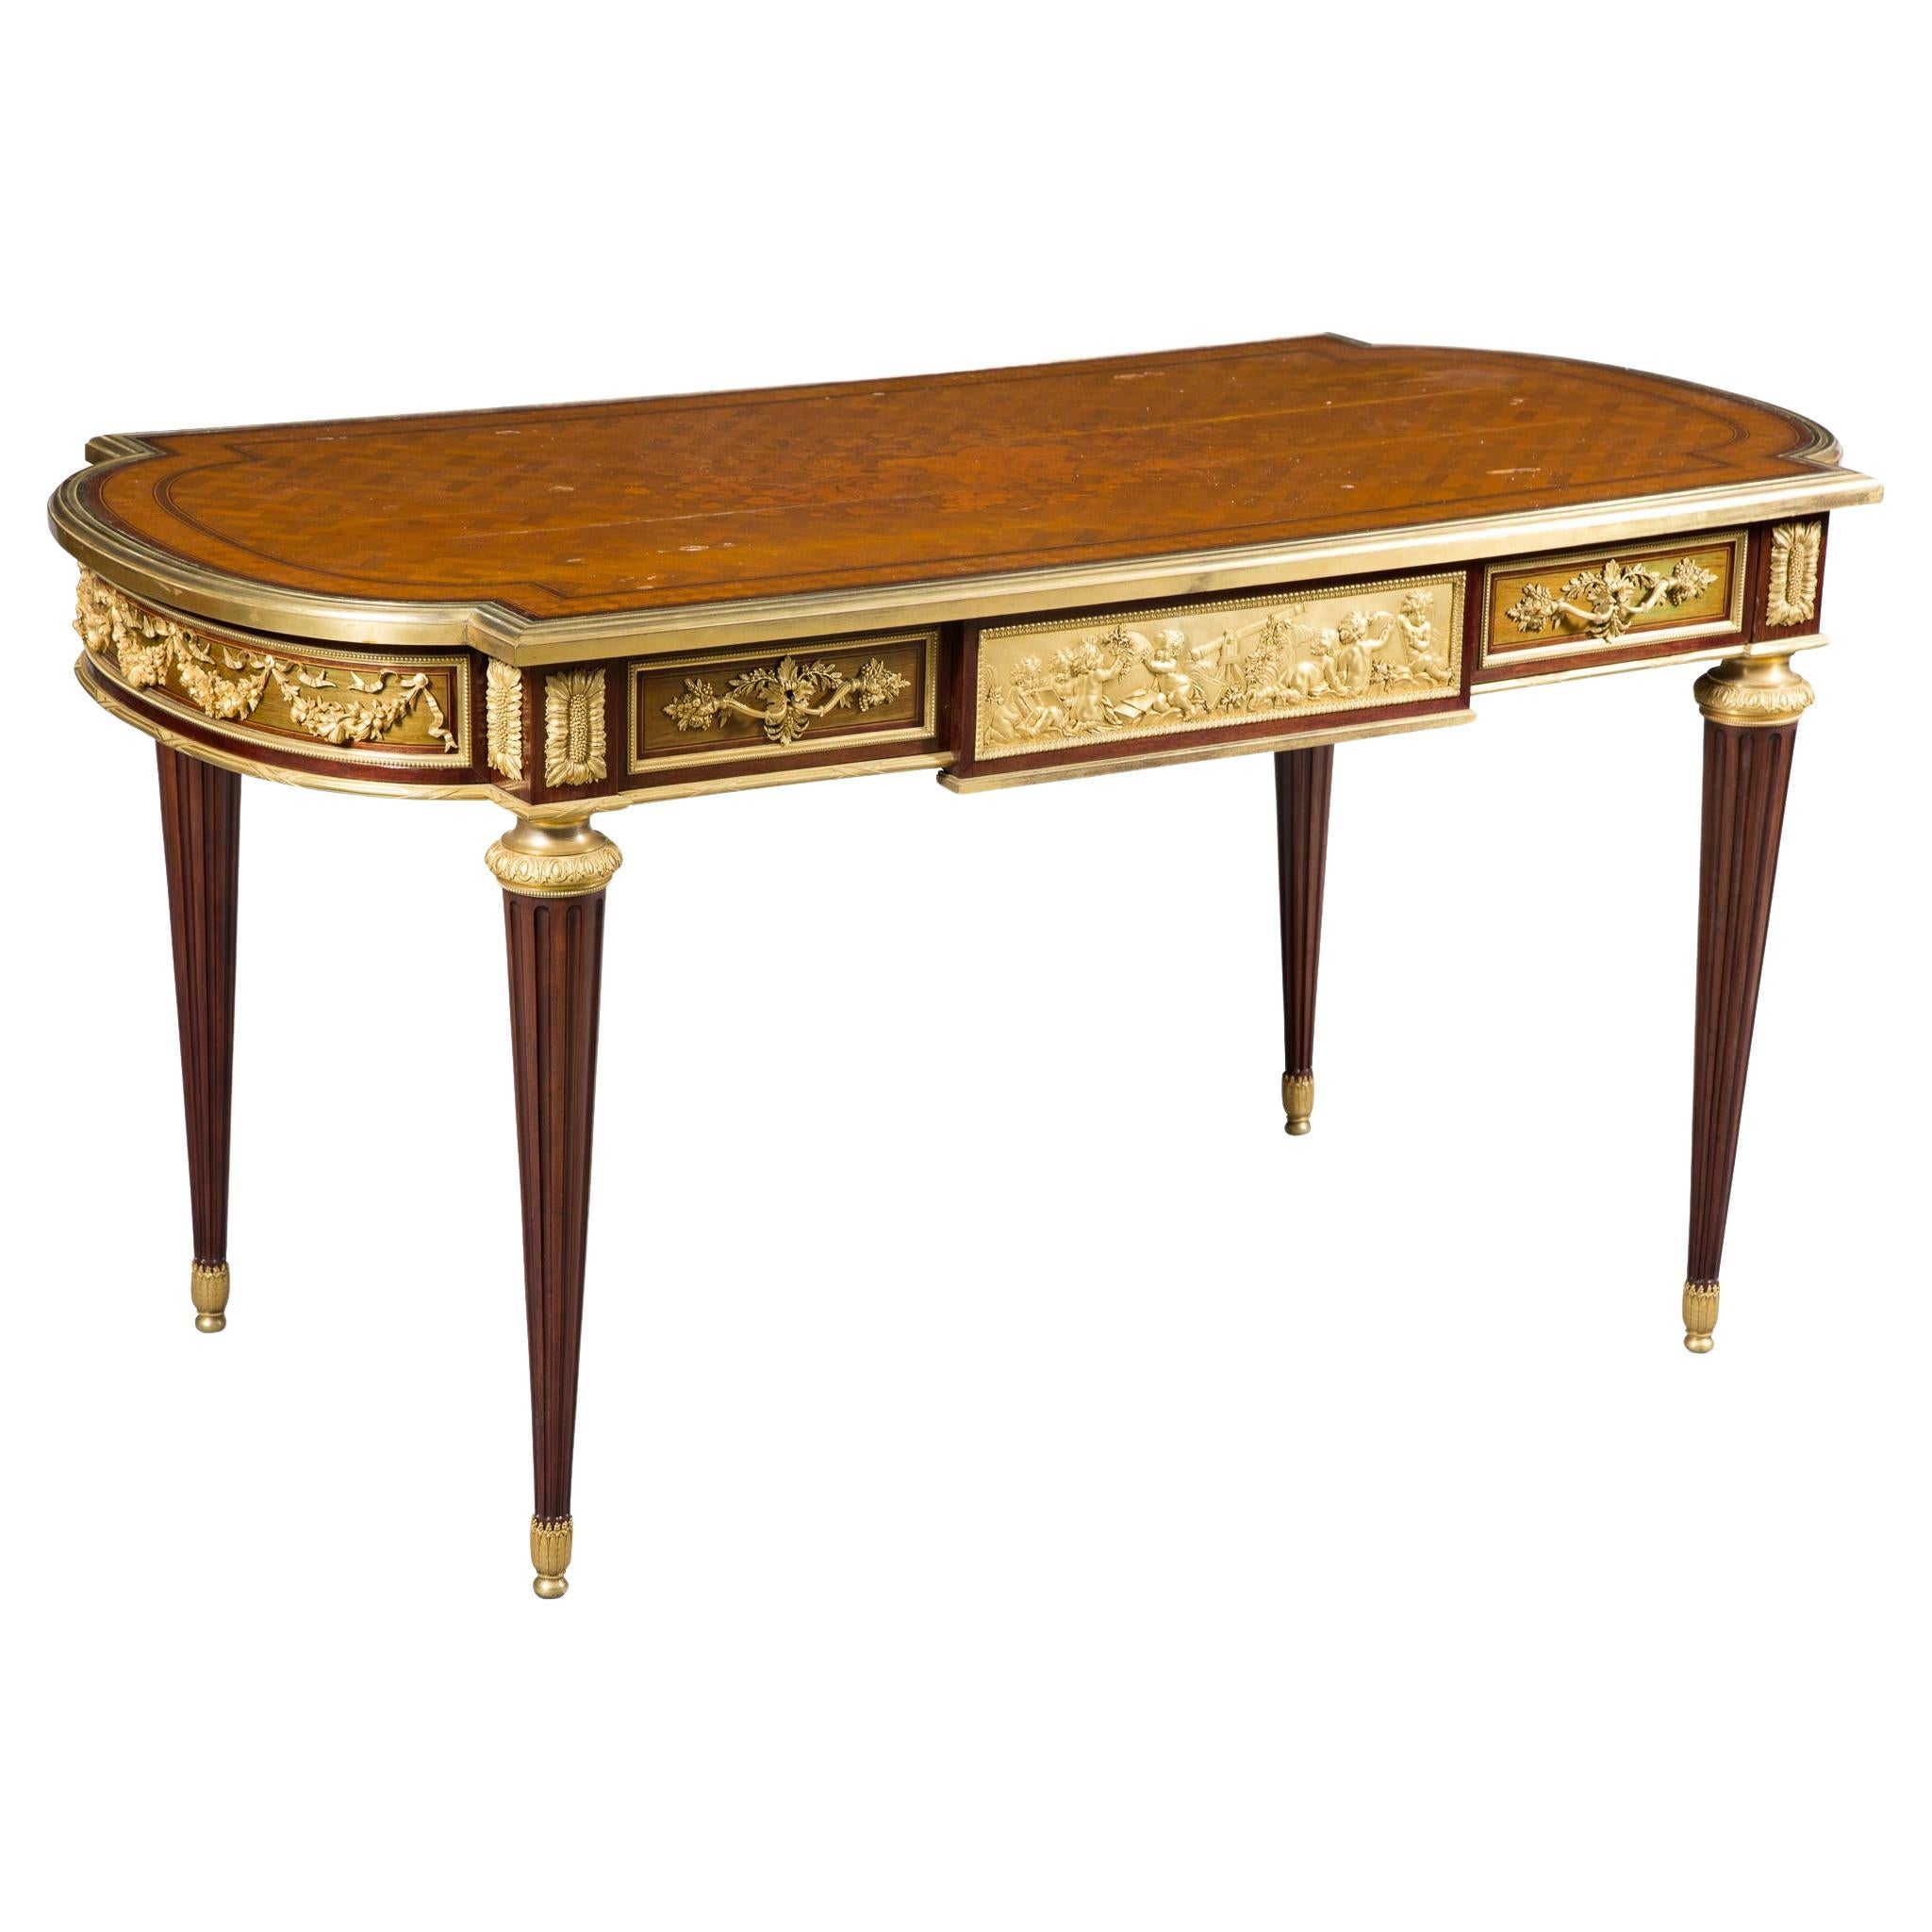 Louis XVI Style Gilt-Bronze Mounted Marquetry and Parquetry by Henry Dasson For Sale